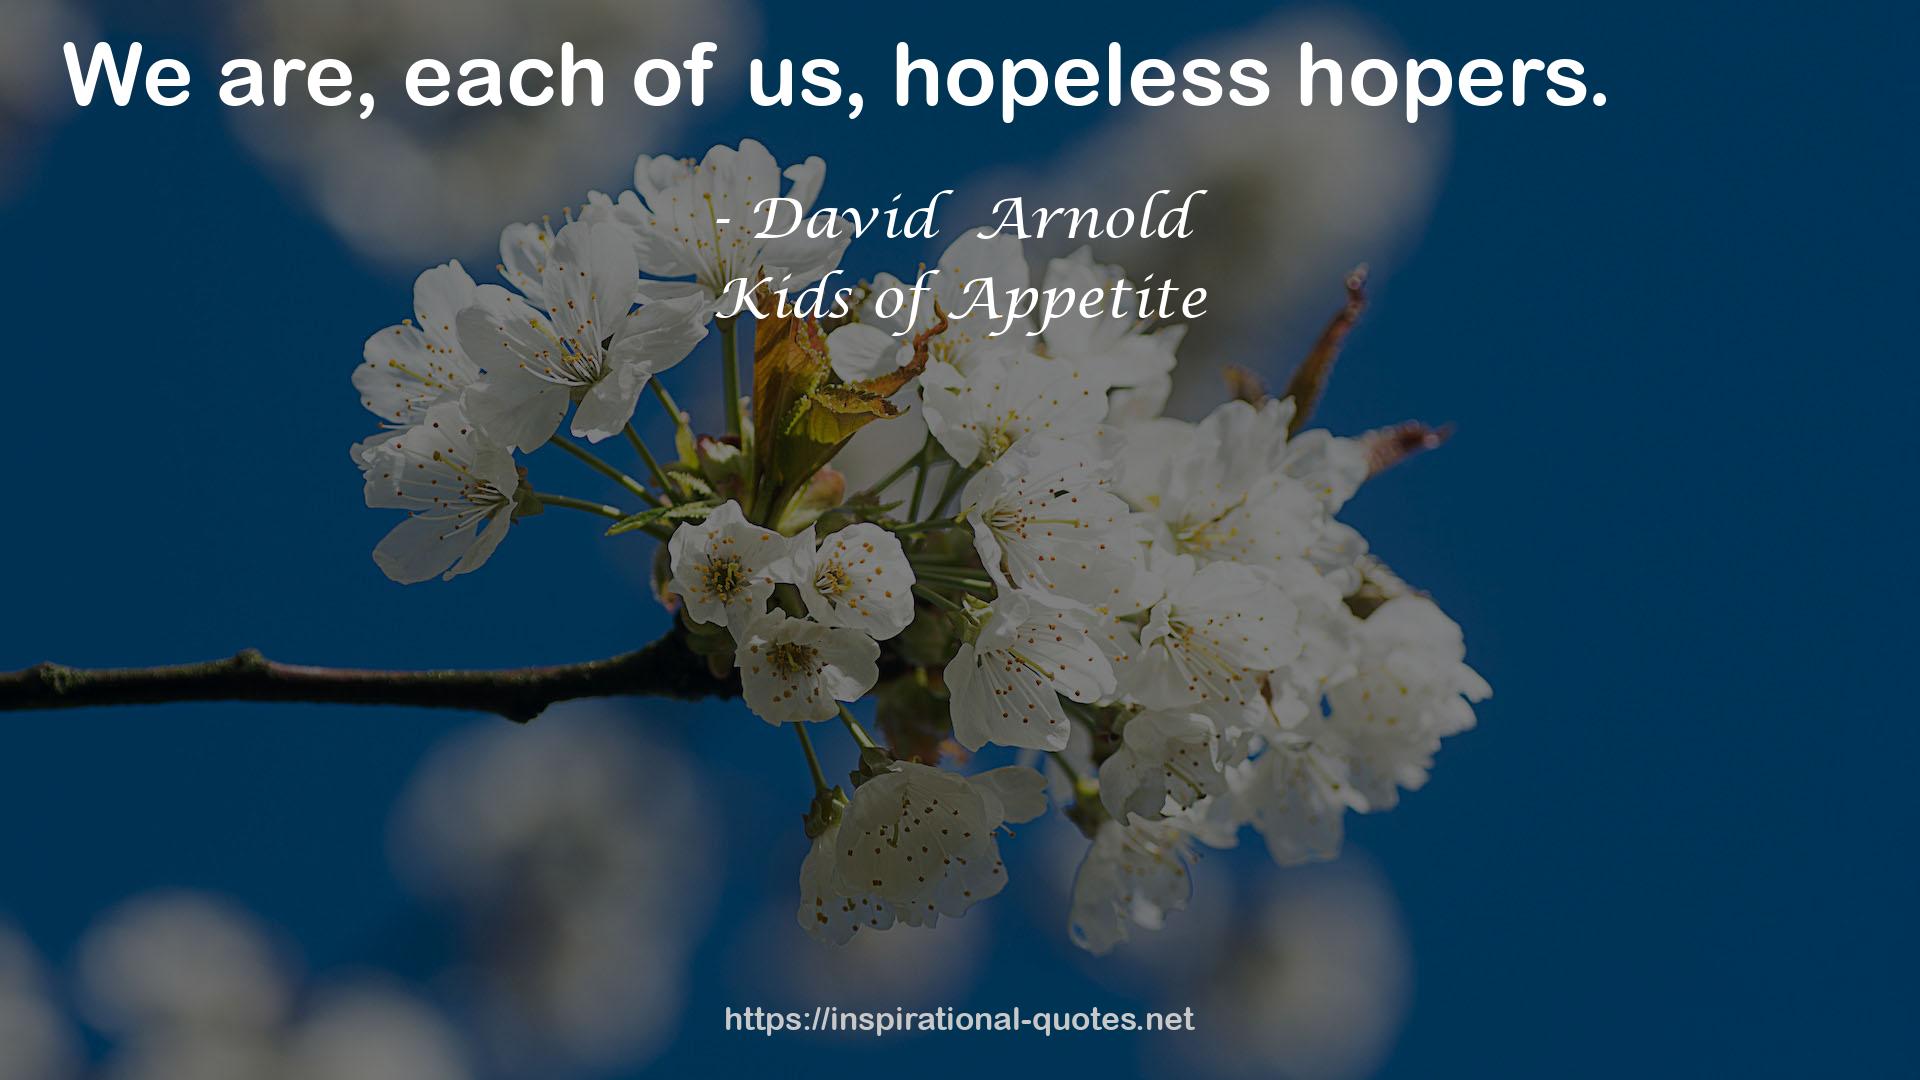 hopeless  QUOTES